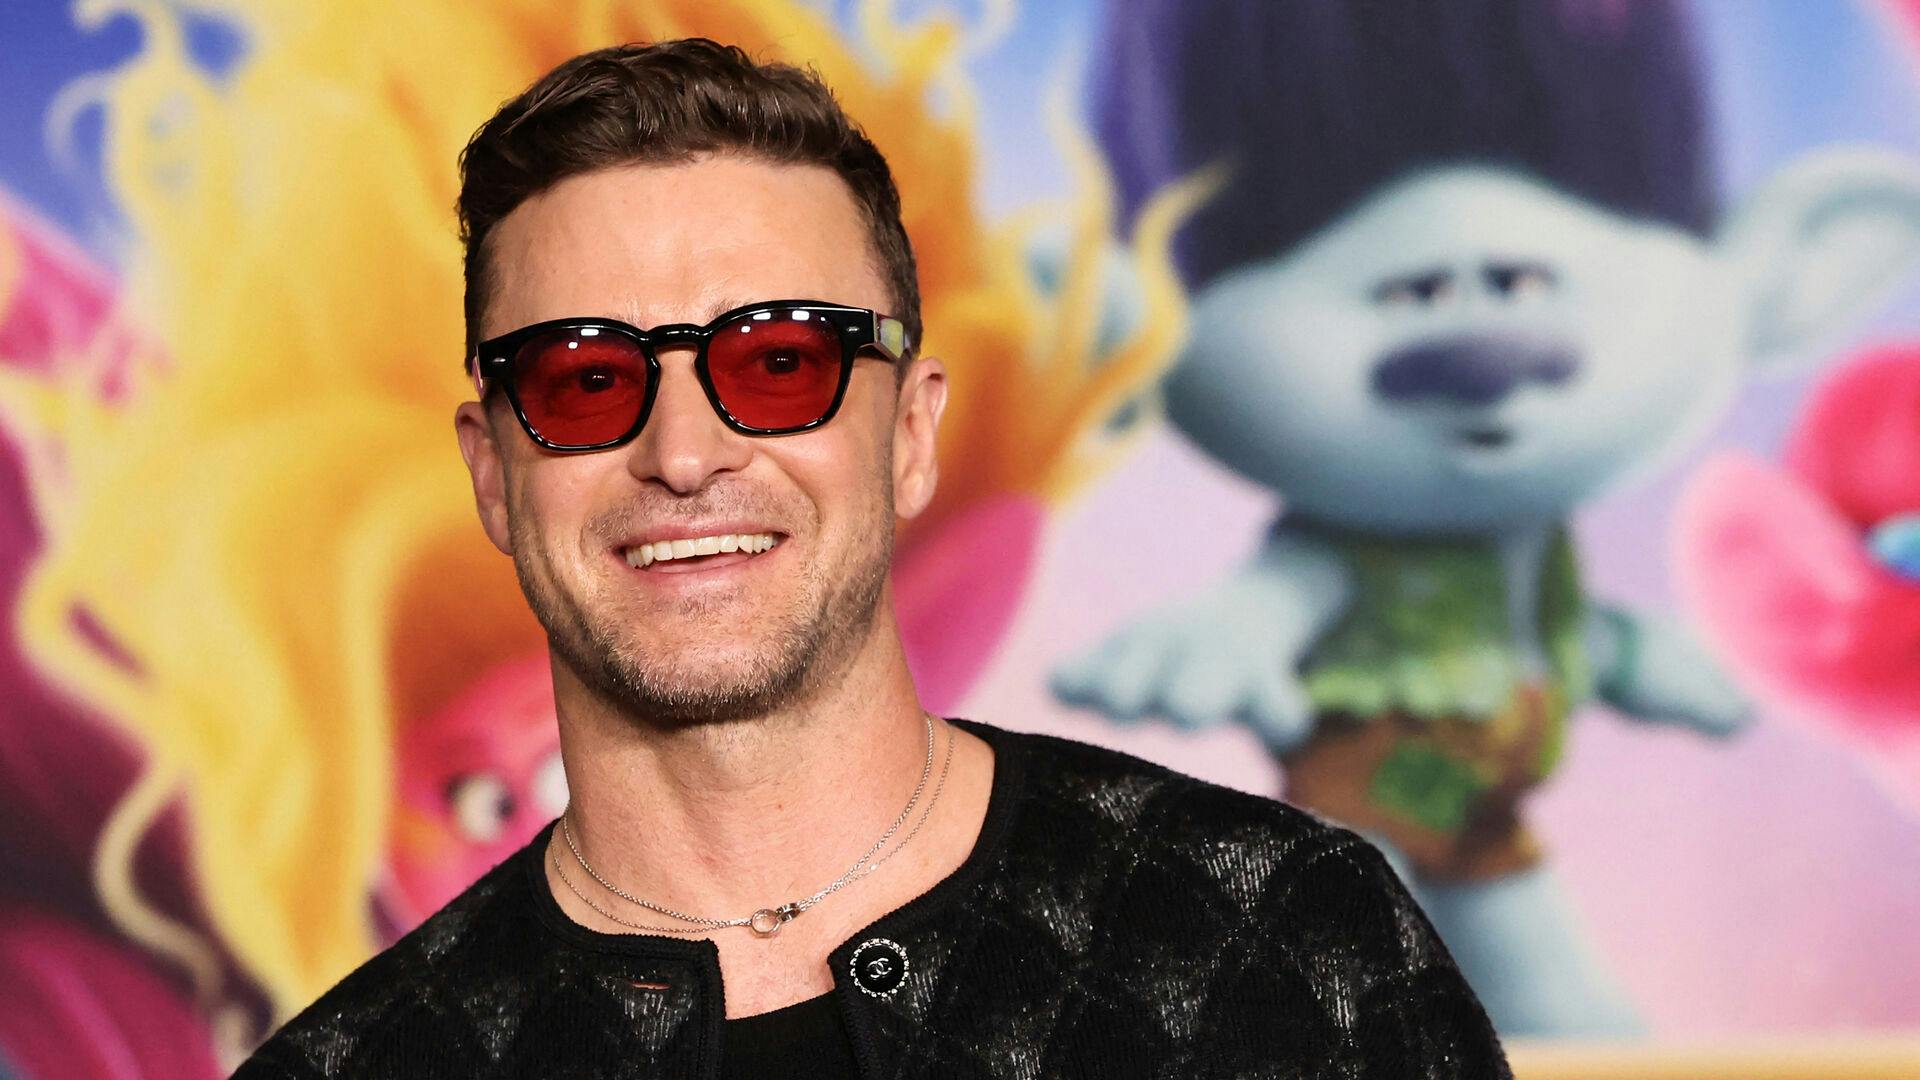 Cast member Justin Timberlake attends a photo call for a special screening of "Trolls Band Together" in Los Angeles, California, U.S., November 15, 2023. REUTERS/Mario Anzuoni